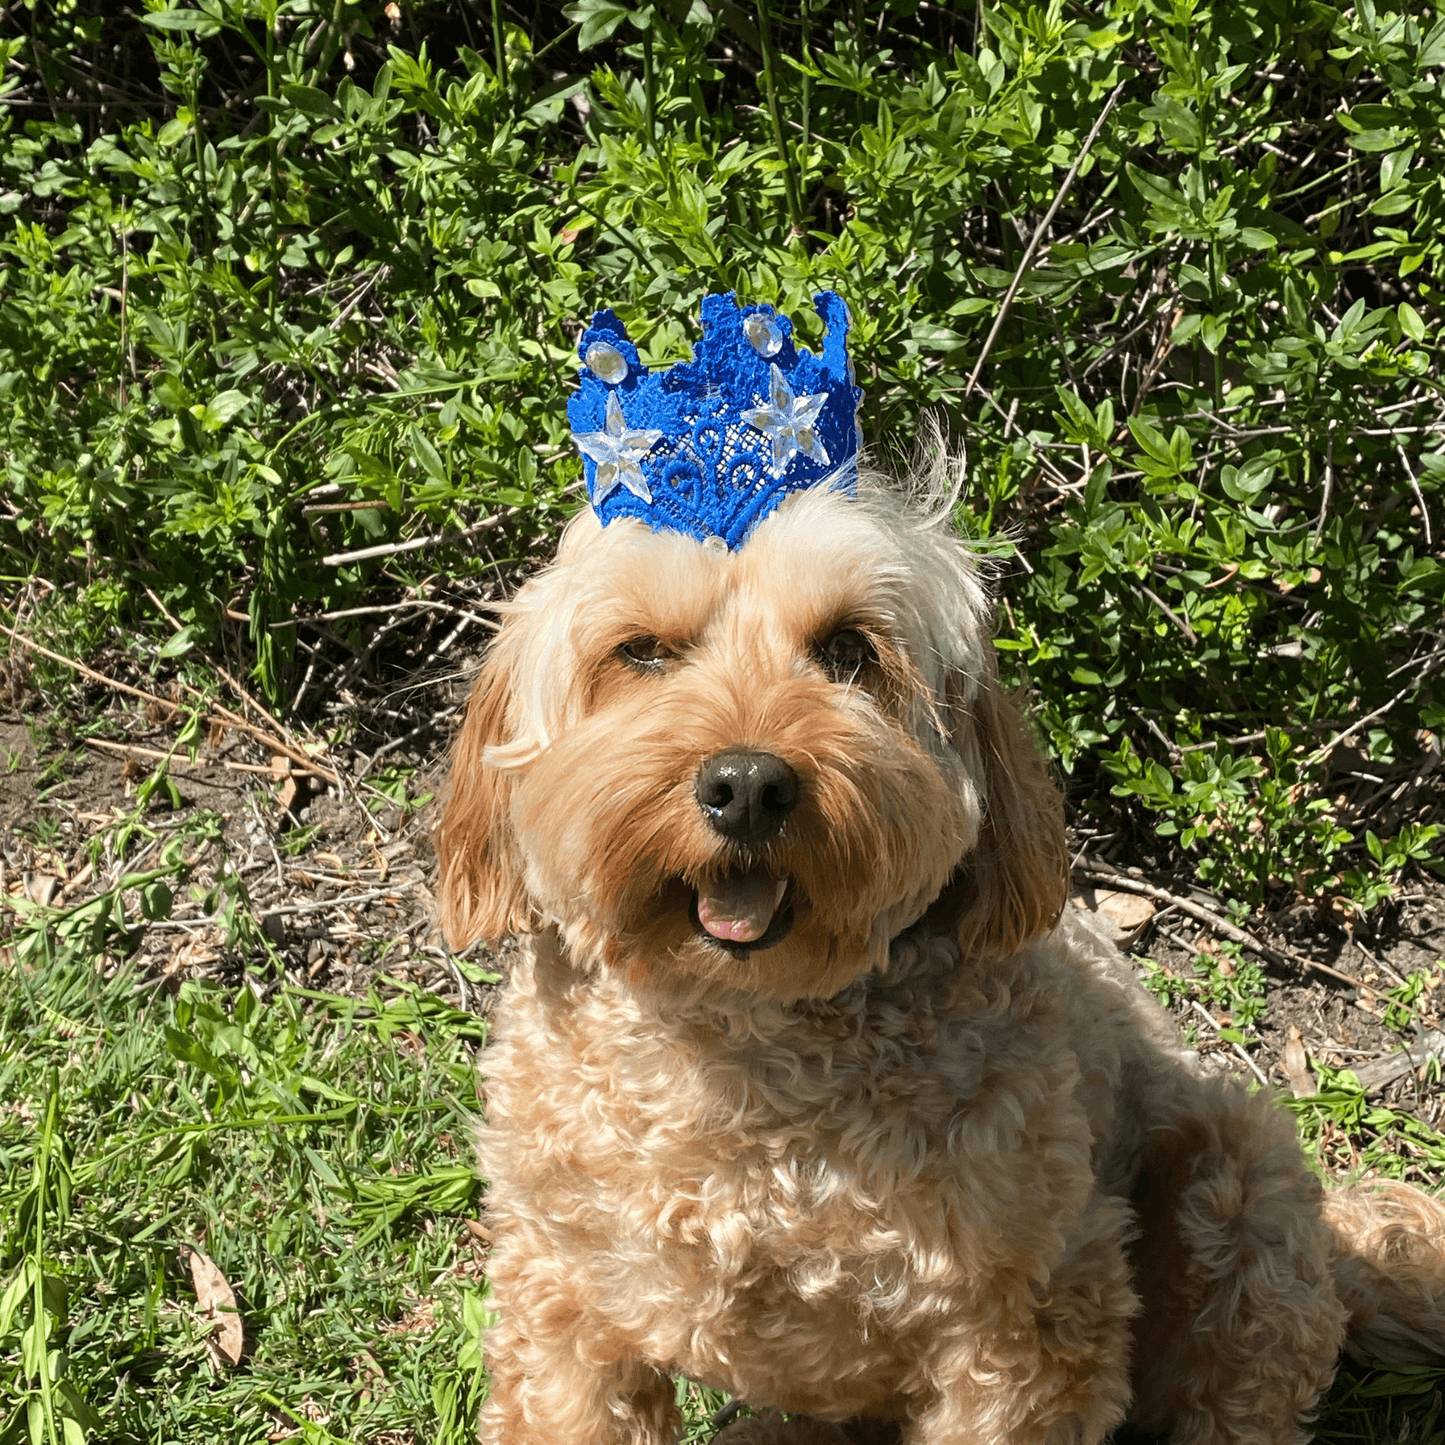 Handamde lace crown dog fashion, let's pawty, royal blue with stones